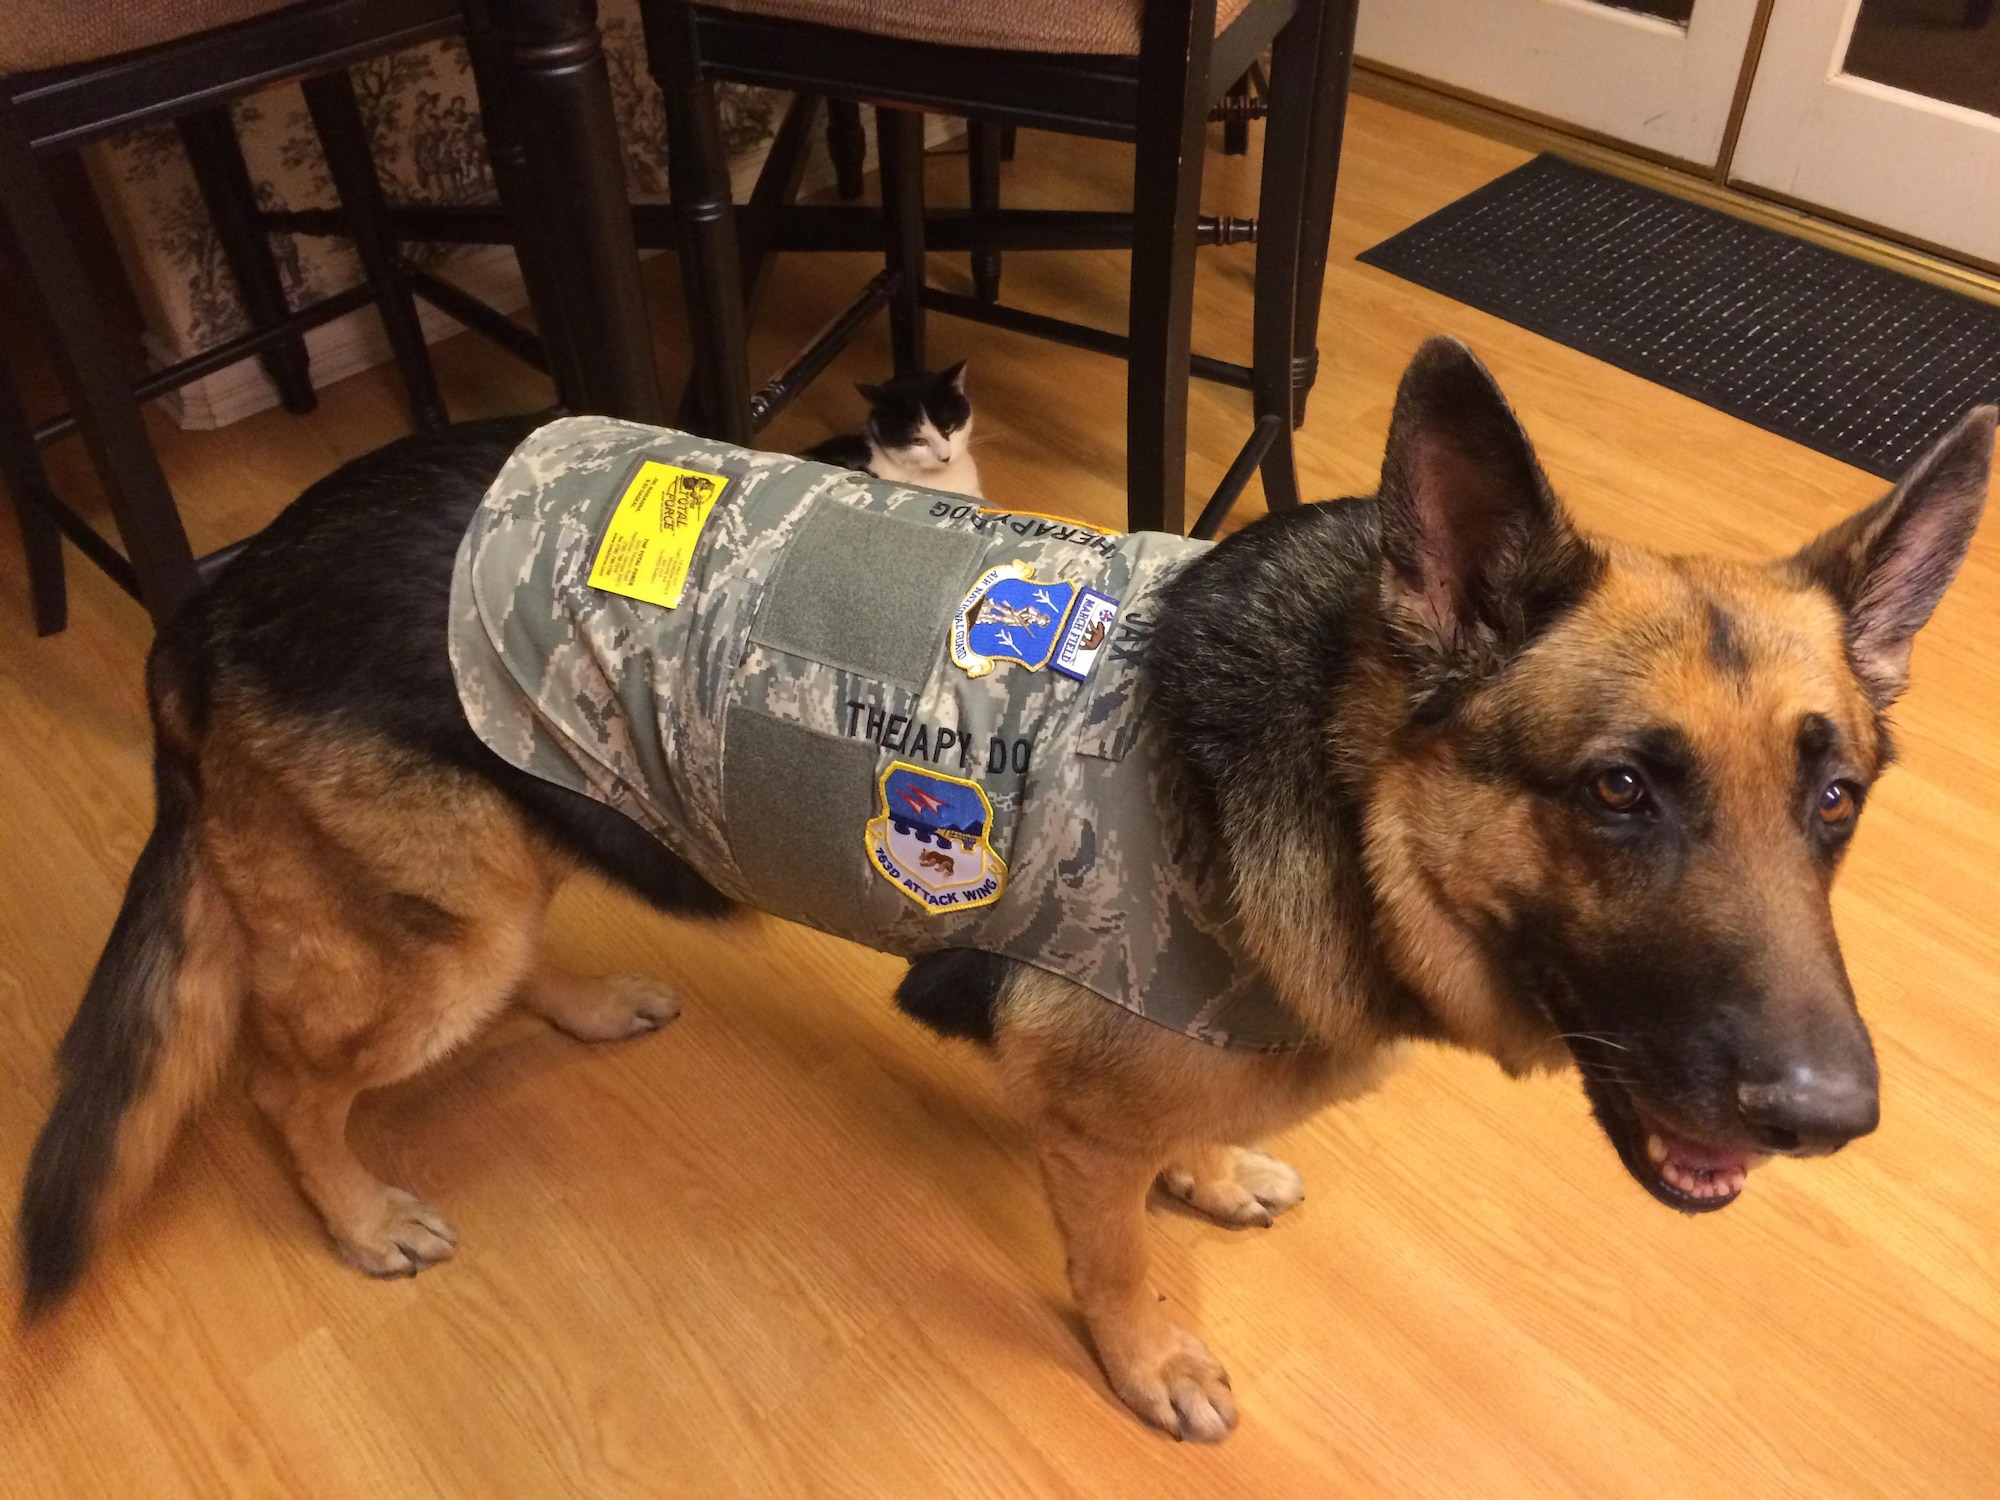 Jax is a German Shepherd who is completing training as a certified therapy dog for the 163rd Attack Wing at March Air Reserve Base. Jax tries on his new vest adorned with all the unit patches from March Air Reserve Base. (Courtesy Photo by David Cunningham)